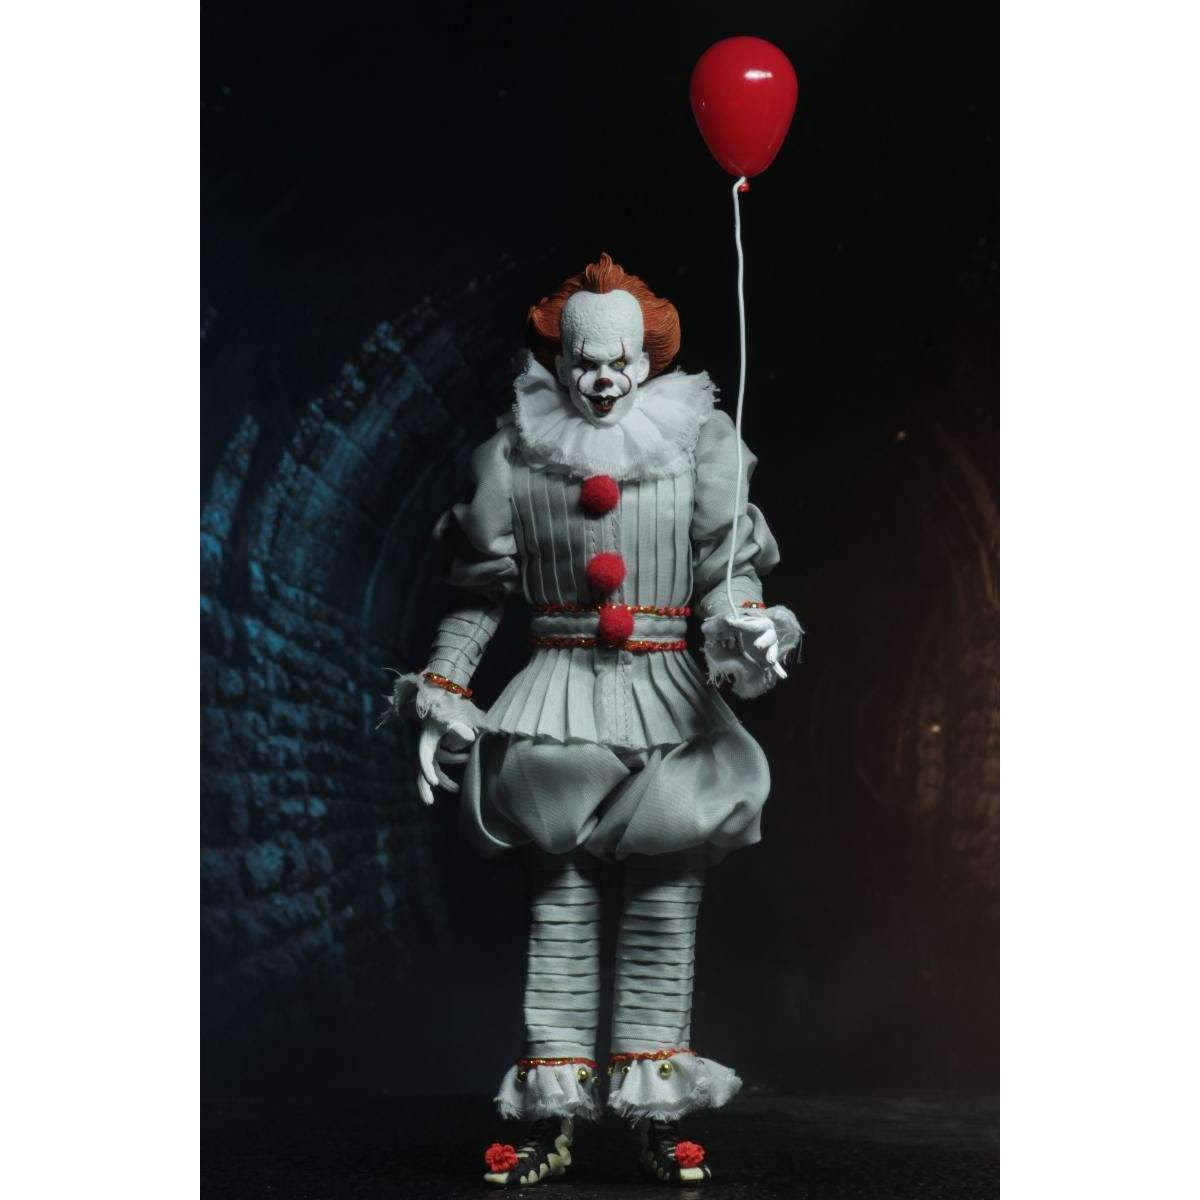 Image of IT - 8" Clothed Action Figure - Pennywise (2017) - Q3 2019